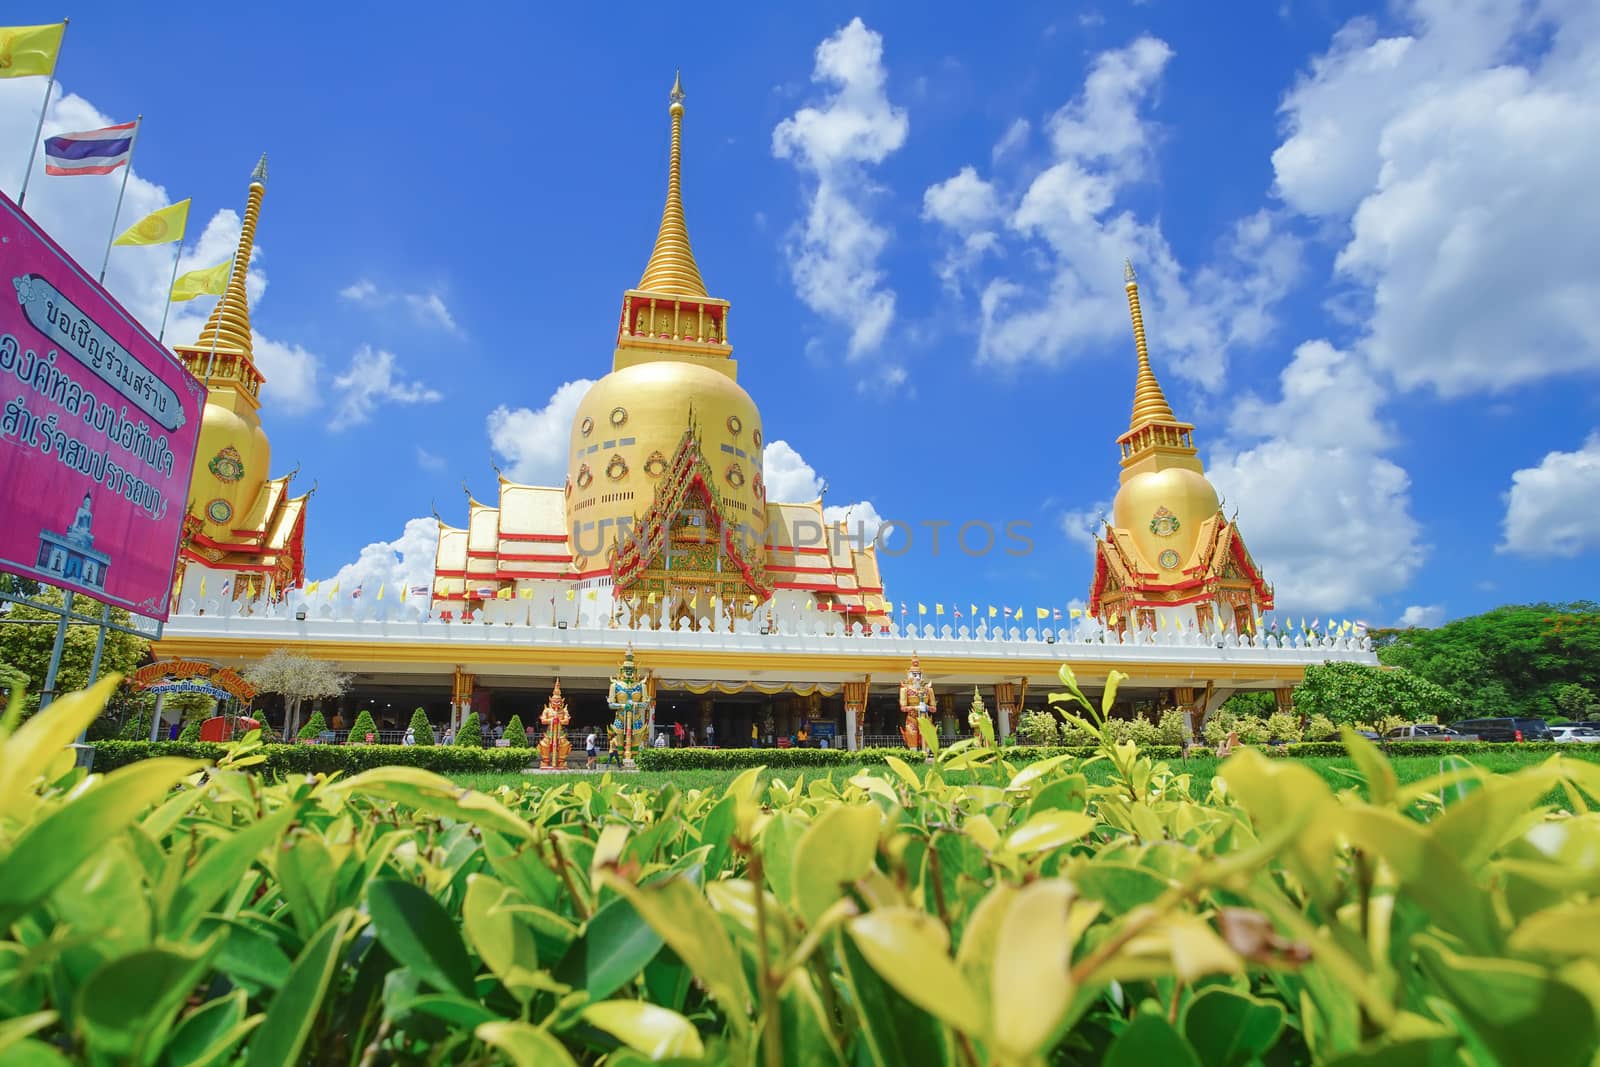 Chachoengsao, Thailand - July 27, 2020: Beautiful scene in Wat Phrong Akat Temple. This famous temple is in Bang Nam Priao district, Chachoengsao province, Thailand.